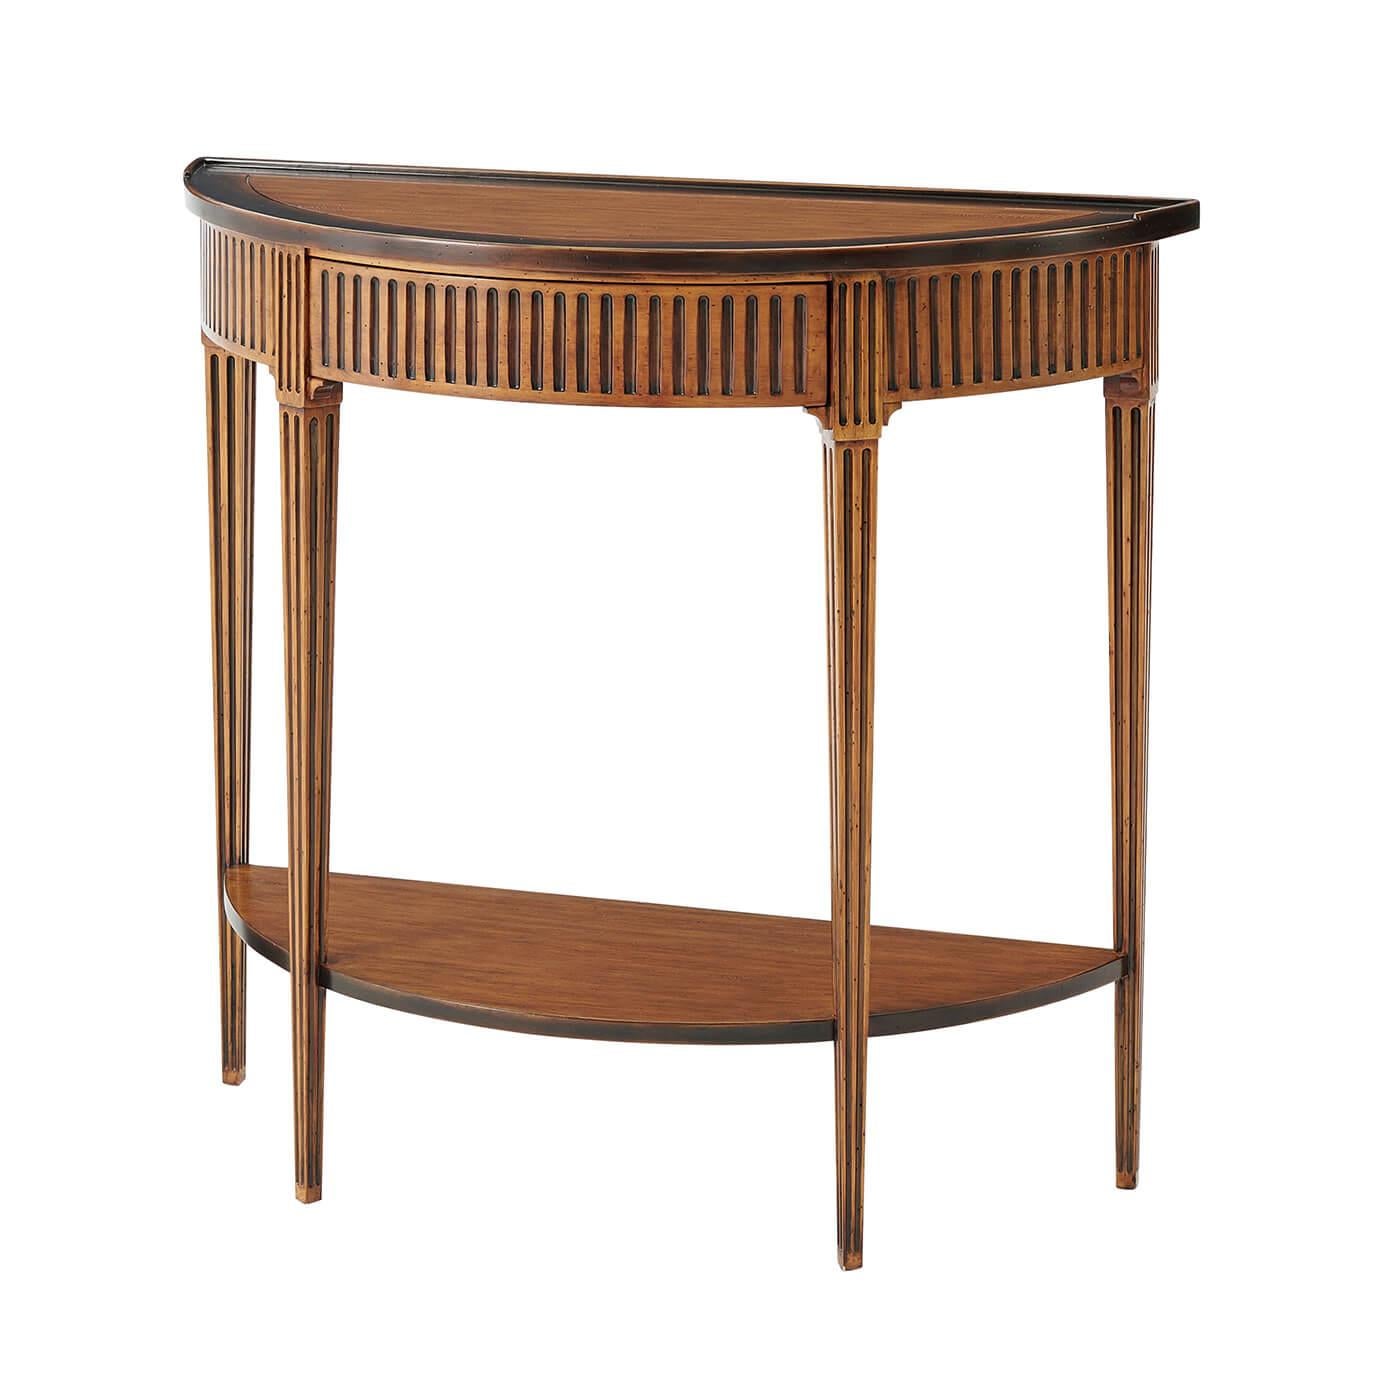 A Louis XVI style rustic honey finish console table, the bowfront gallery top with an ebonized edge, above a fluted frieze and drawer, on square fluted legs, joined by an under tier. 

Dimensions: 38